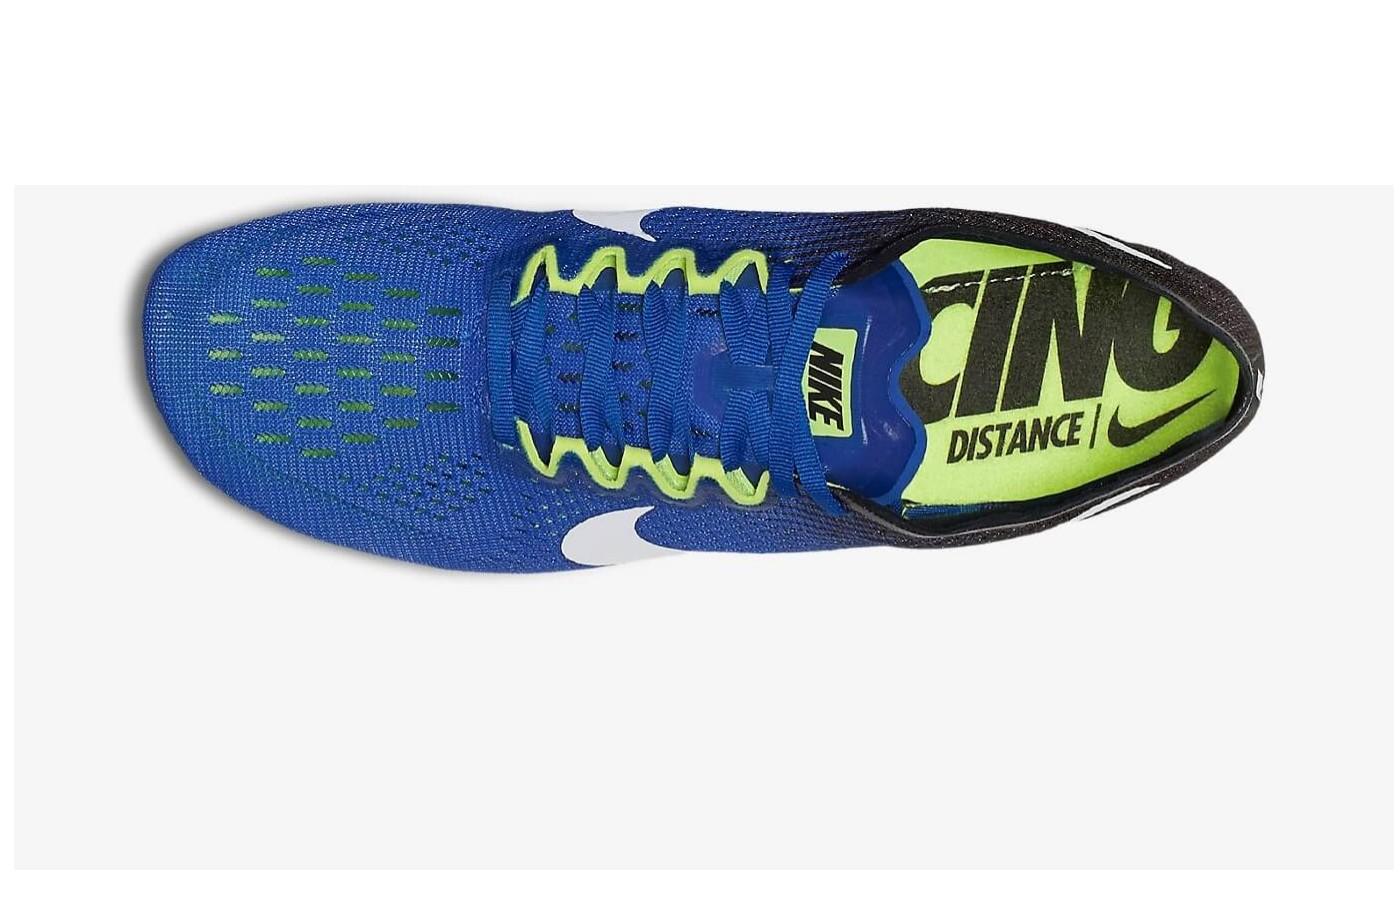 Flymesh material on the upper helps keep these shoes lightweight and breathable.